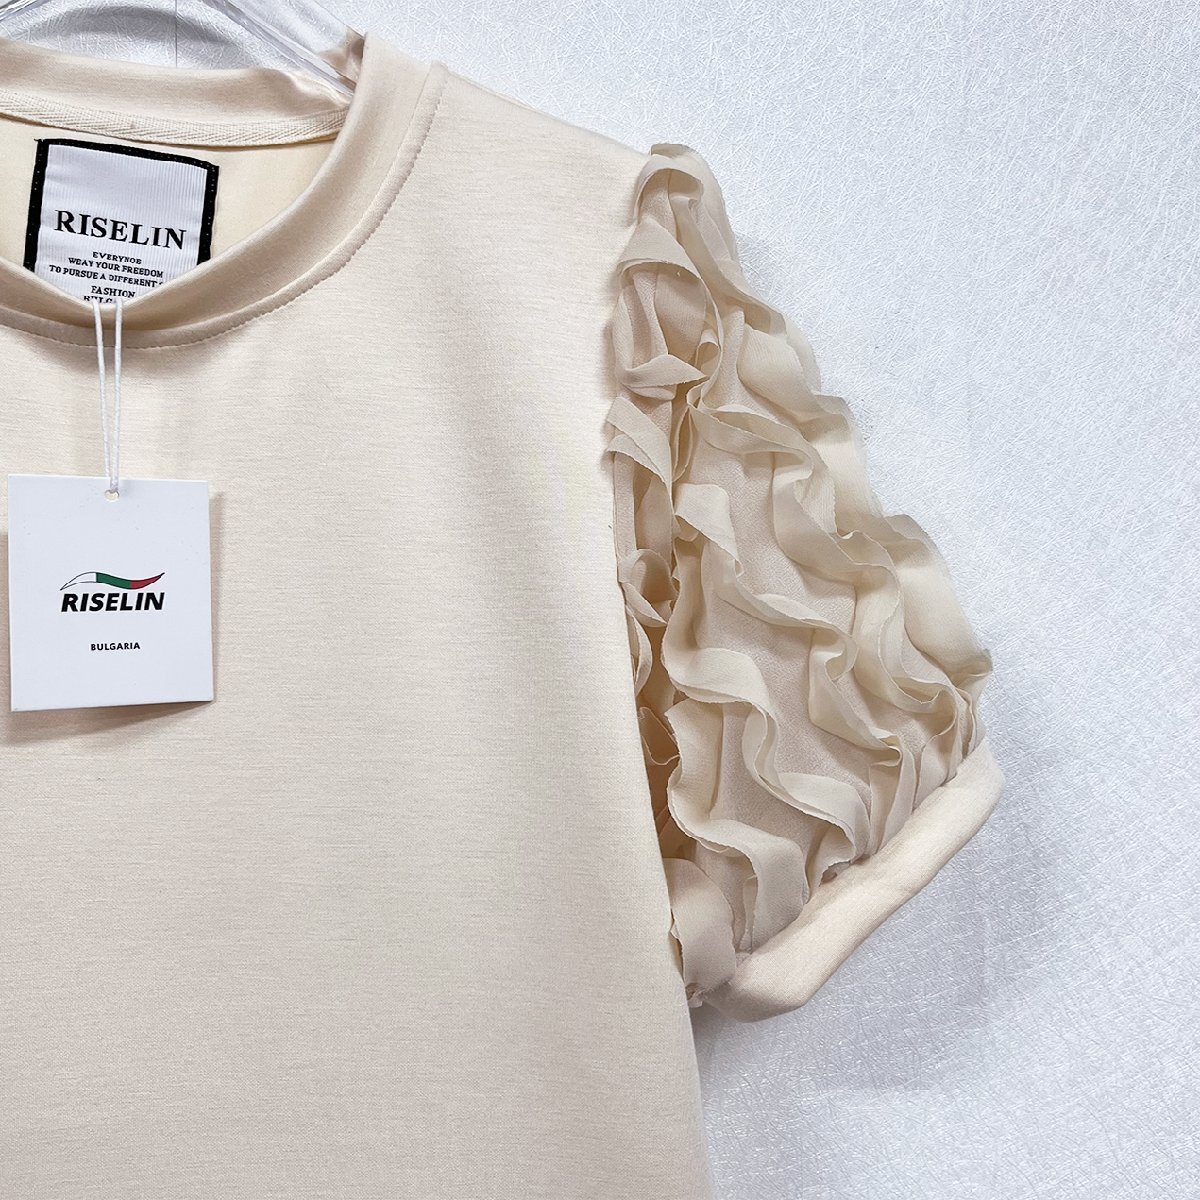  new work Europe made * regular price 2 ten thousand * BVLGARY a departure *RISELIN short sleeves T-shirt blouse on goods ventilation soft frill pretty clean . everyday lady's M